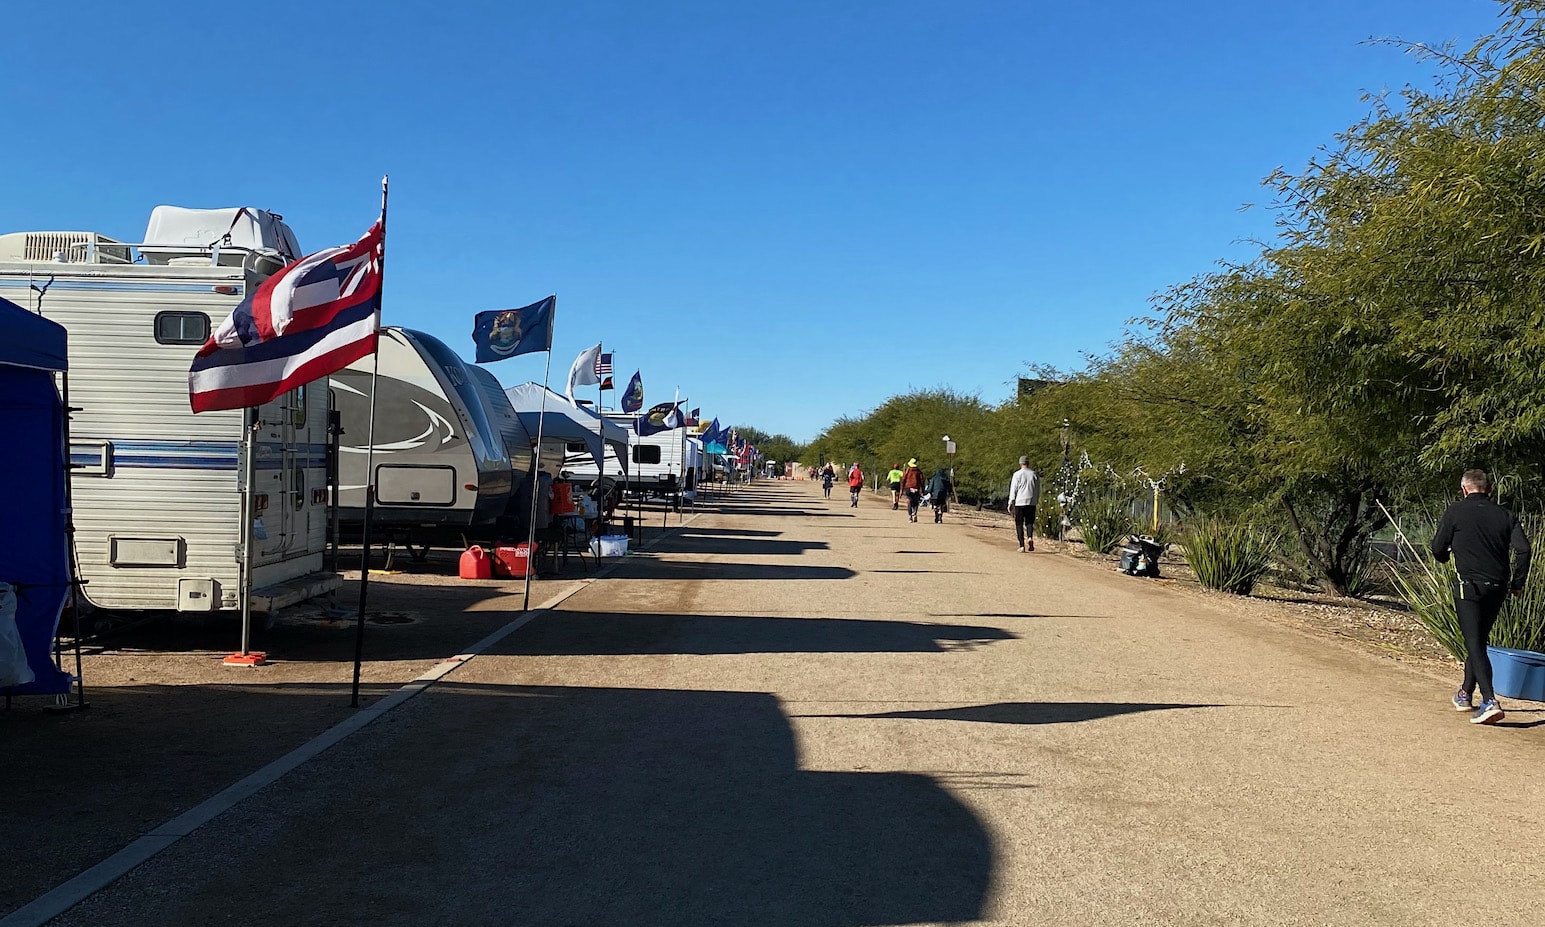 RV Park at Across the Years with runners on dirt track.